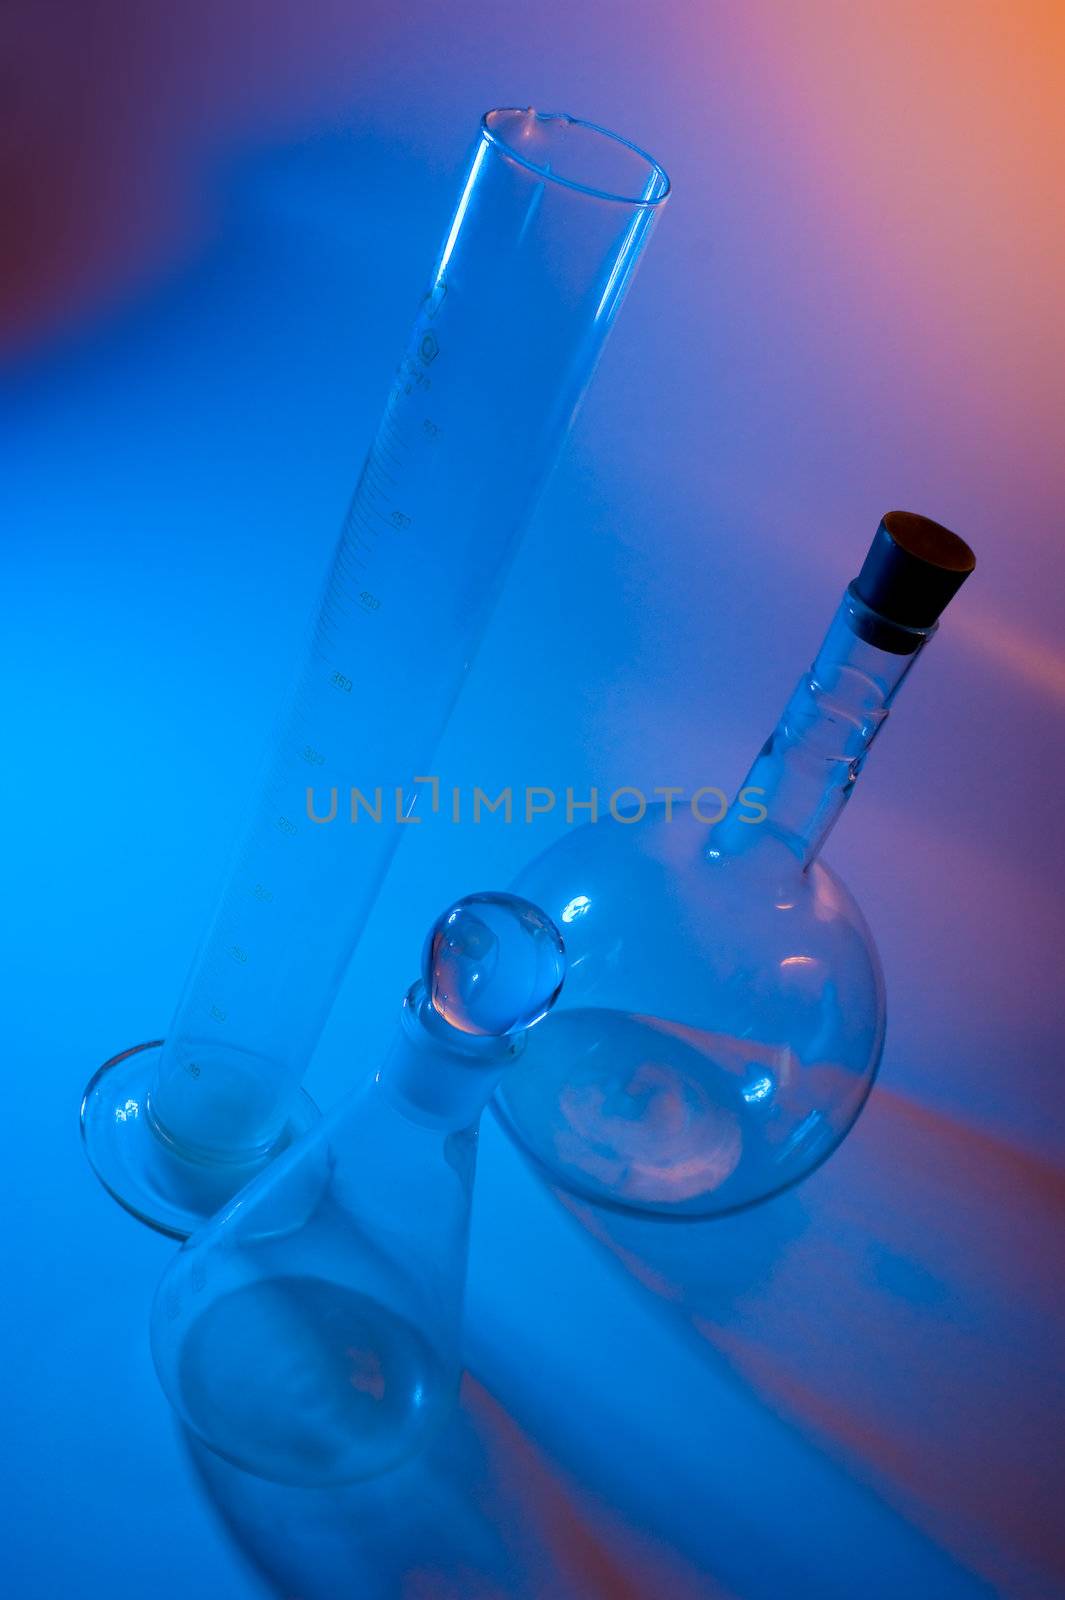 chemical glassware in multicolored lights